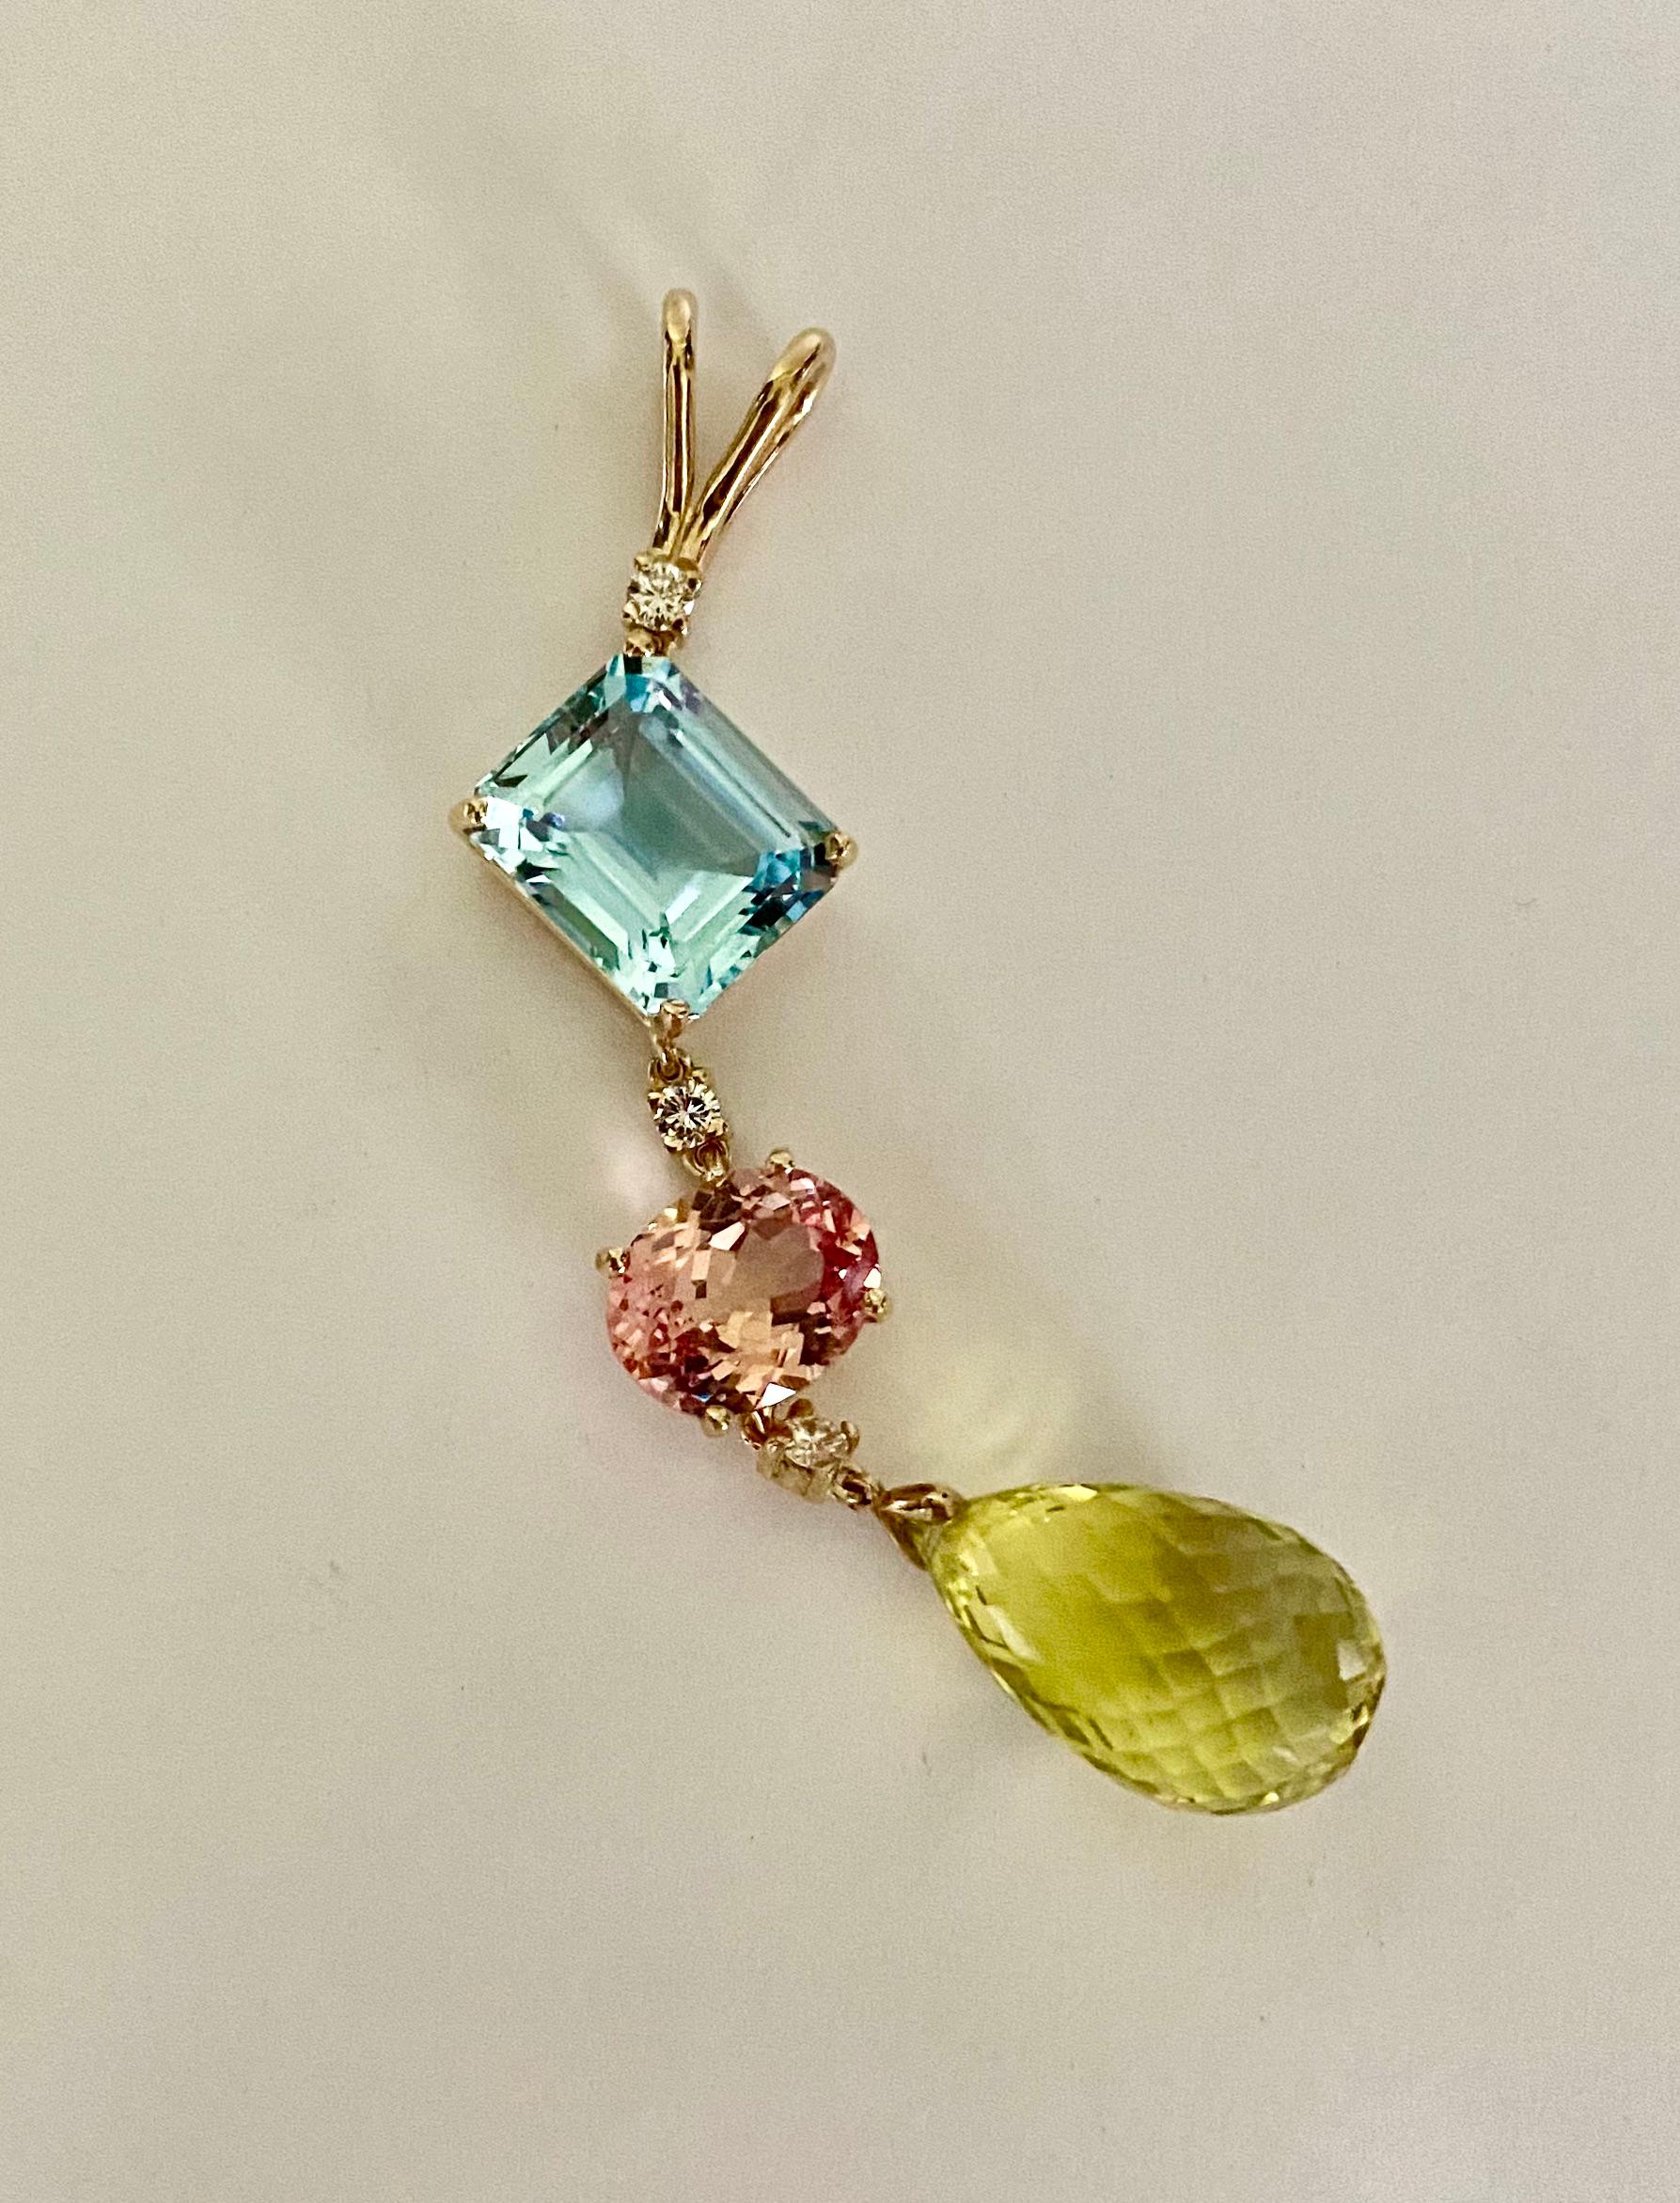 A medley of colors and shapes come together to create this elegant Stiletto pendant.  A sky blue topaz in an emerald cut tops the list.  Next, an oval pink topaz drops below.  White diamonds space the gems and add additional sparkle.  Finally, a